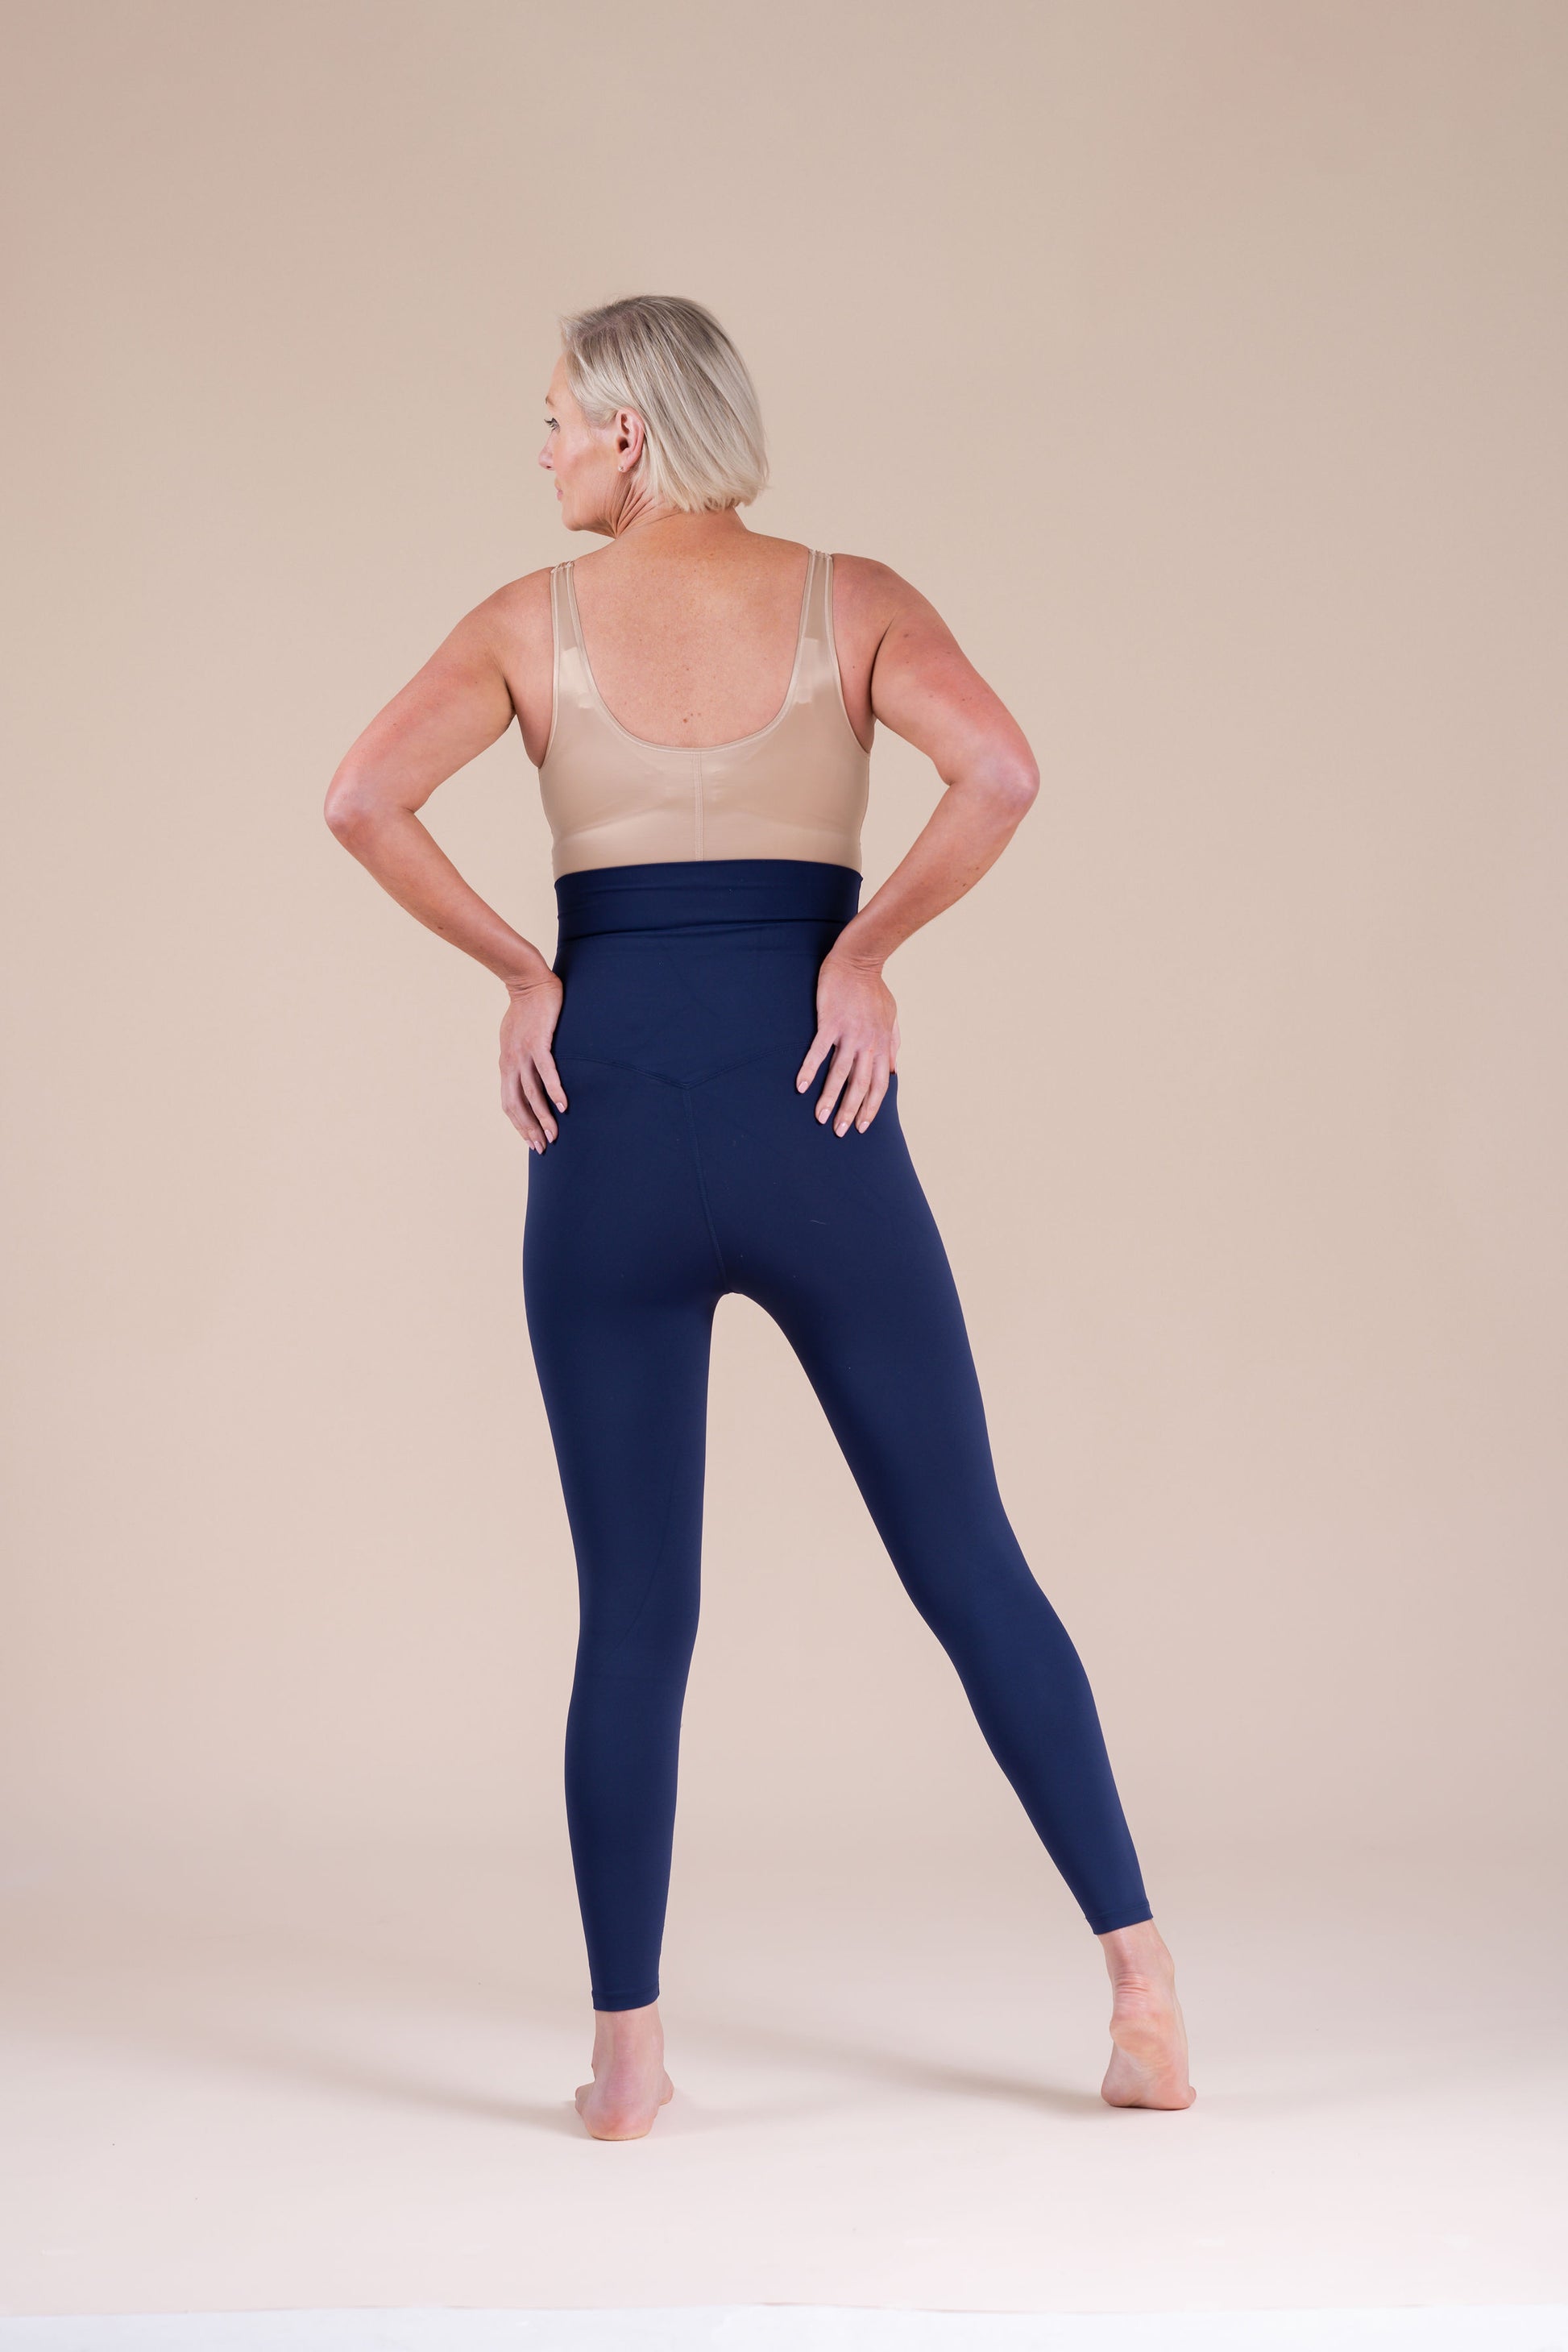 Spanx's Ultra-Flattering Leggings with a Built-In Sculpting Secret Are 50%  Off Today